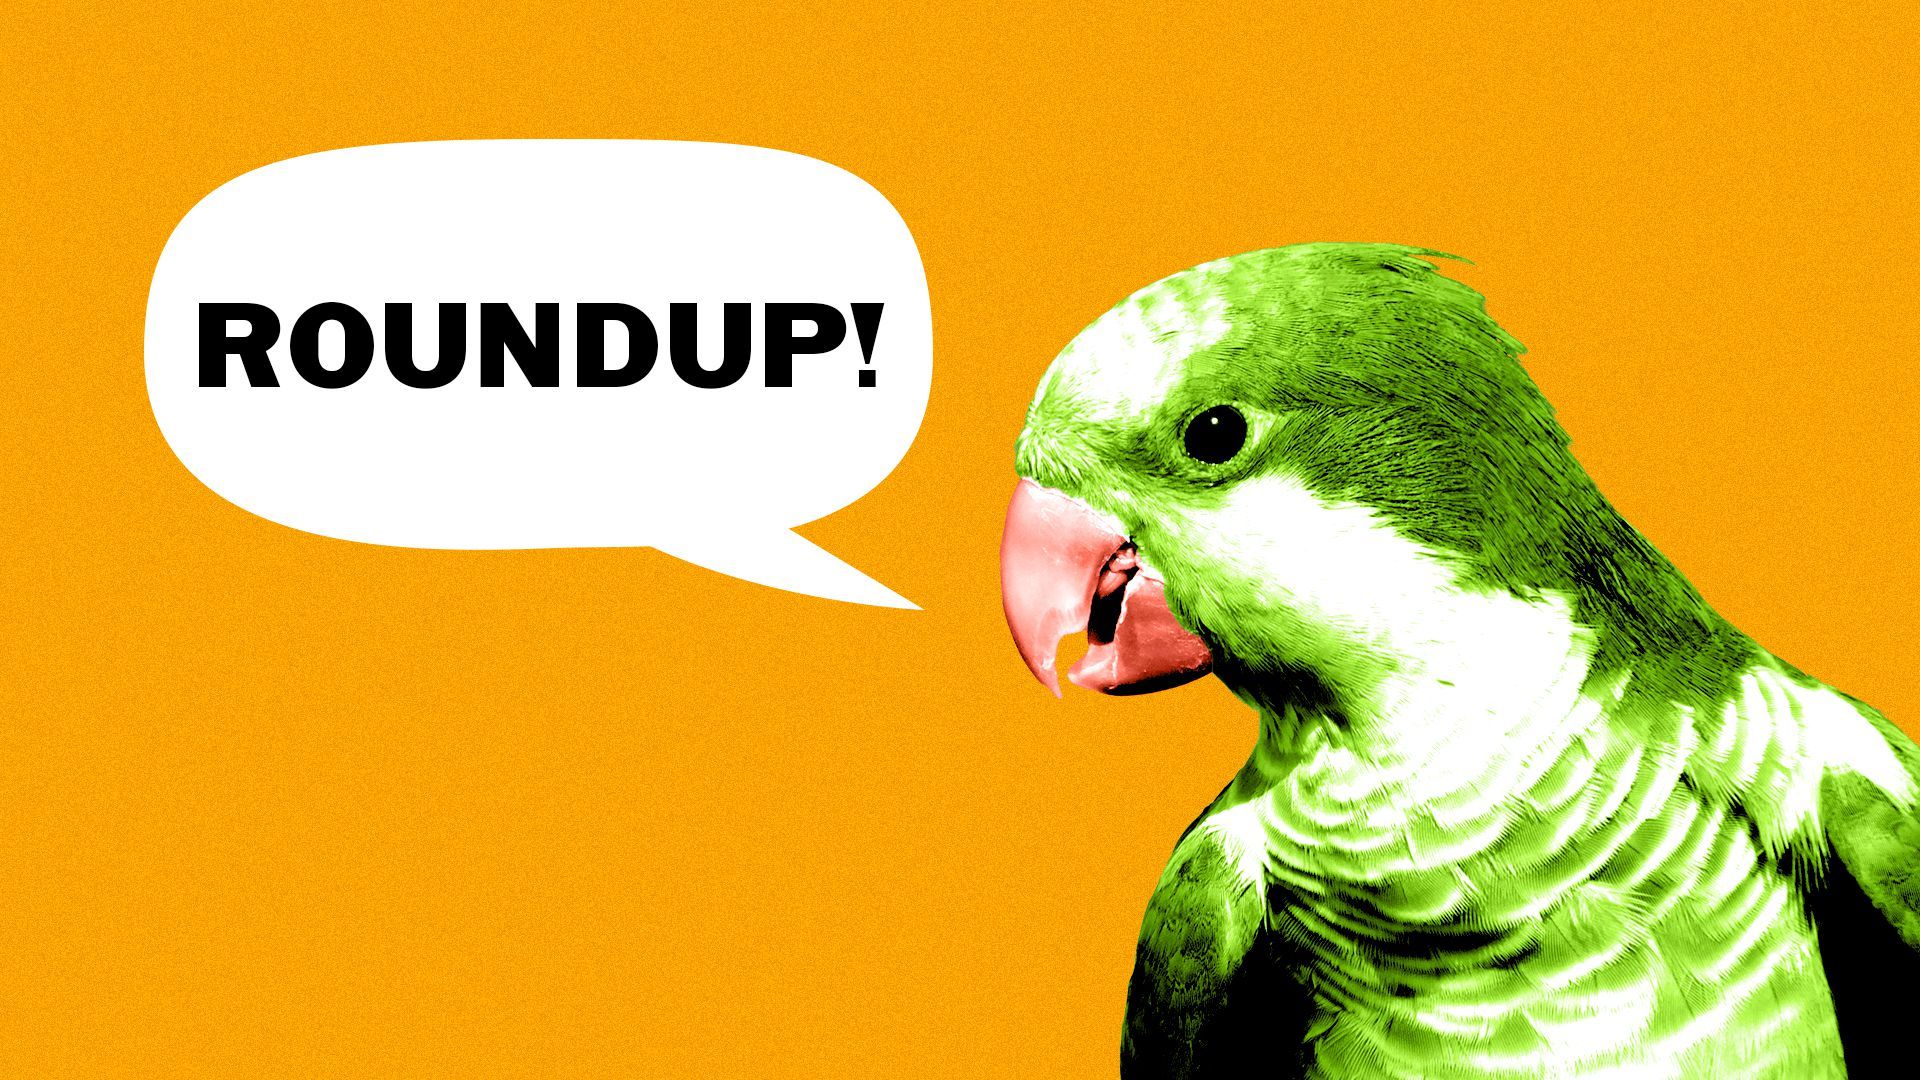 Illustration of a monk parakeet with a word balloon saying, "Roundup!"